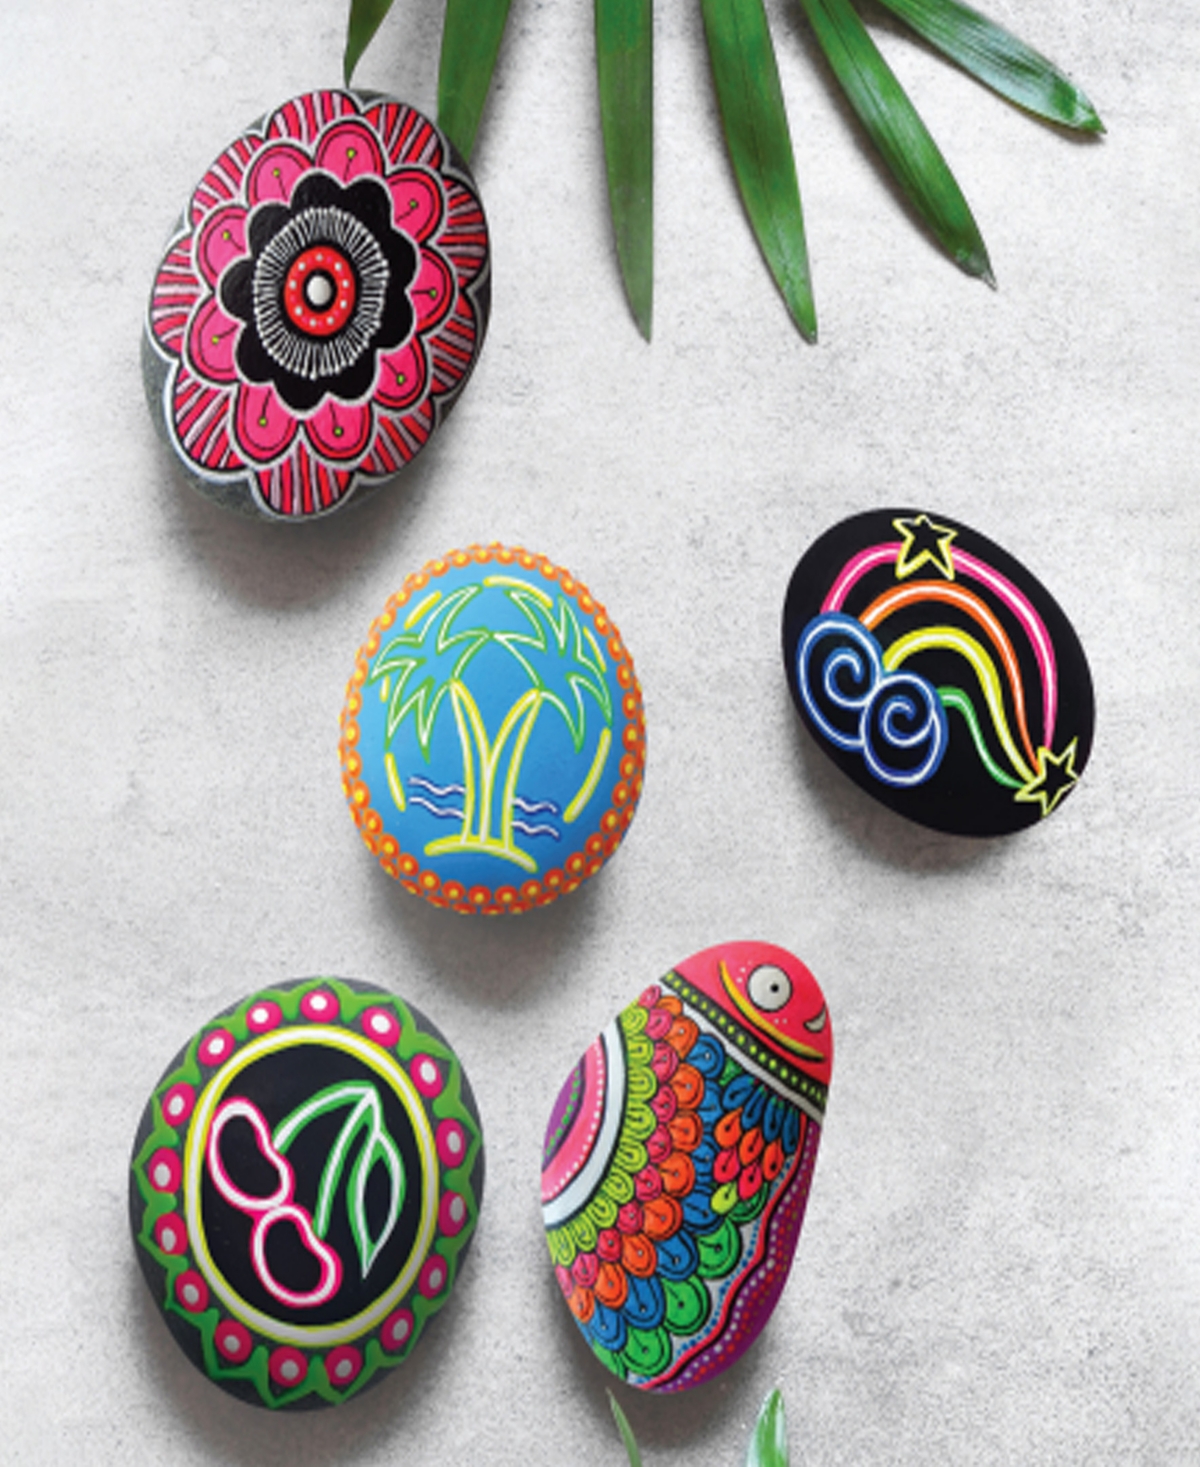 Shop Craft Maker The Complete Neon Rock Art Kit Diy Rock Painting For Kids, Rocks, Brushes, Paint, Stencils Included  In Multi